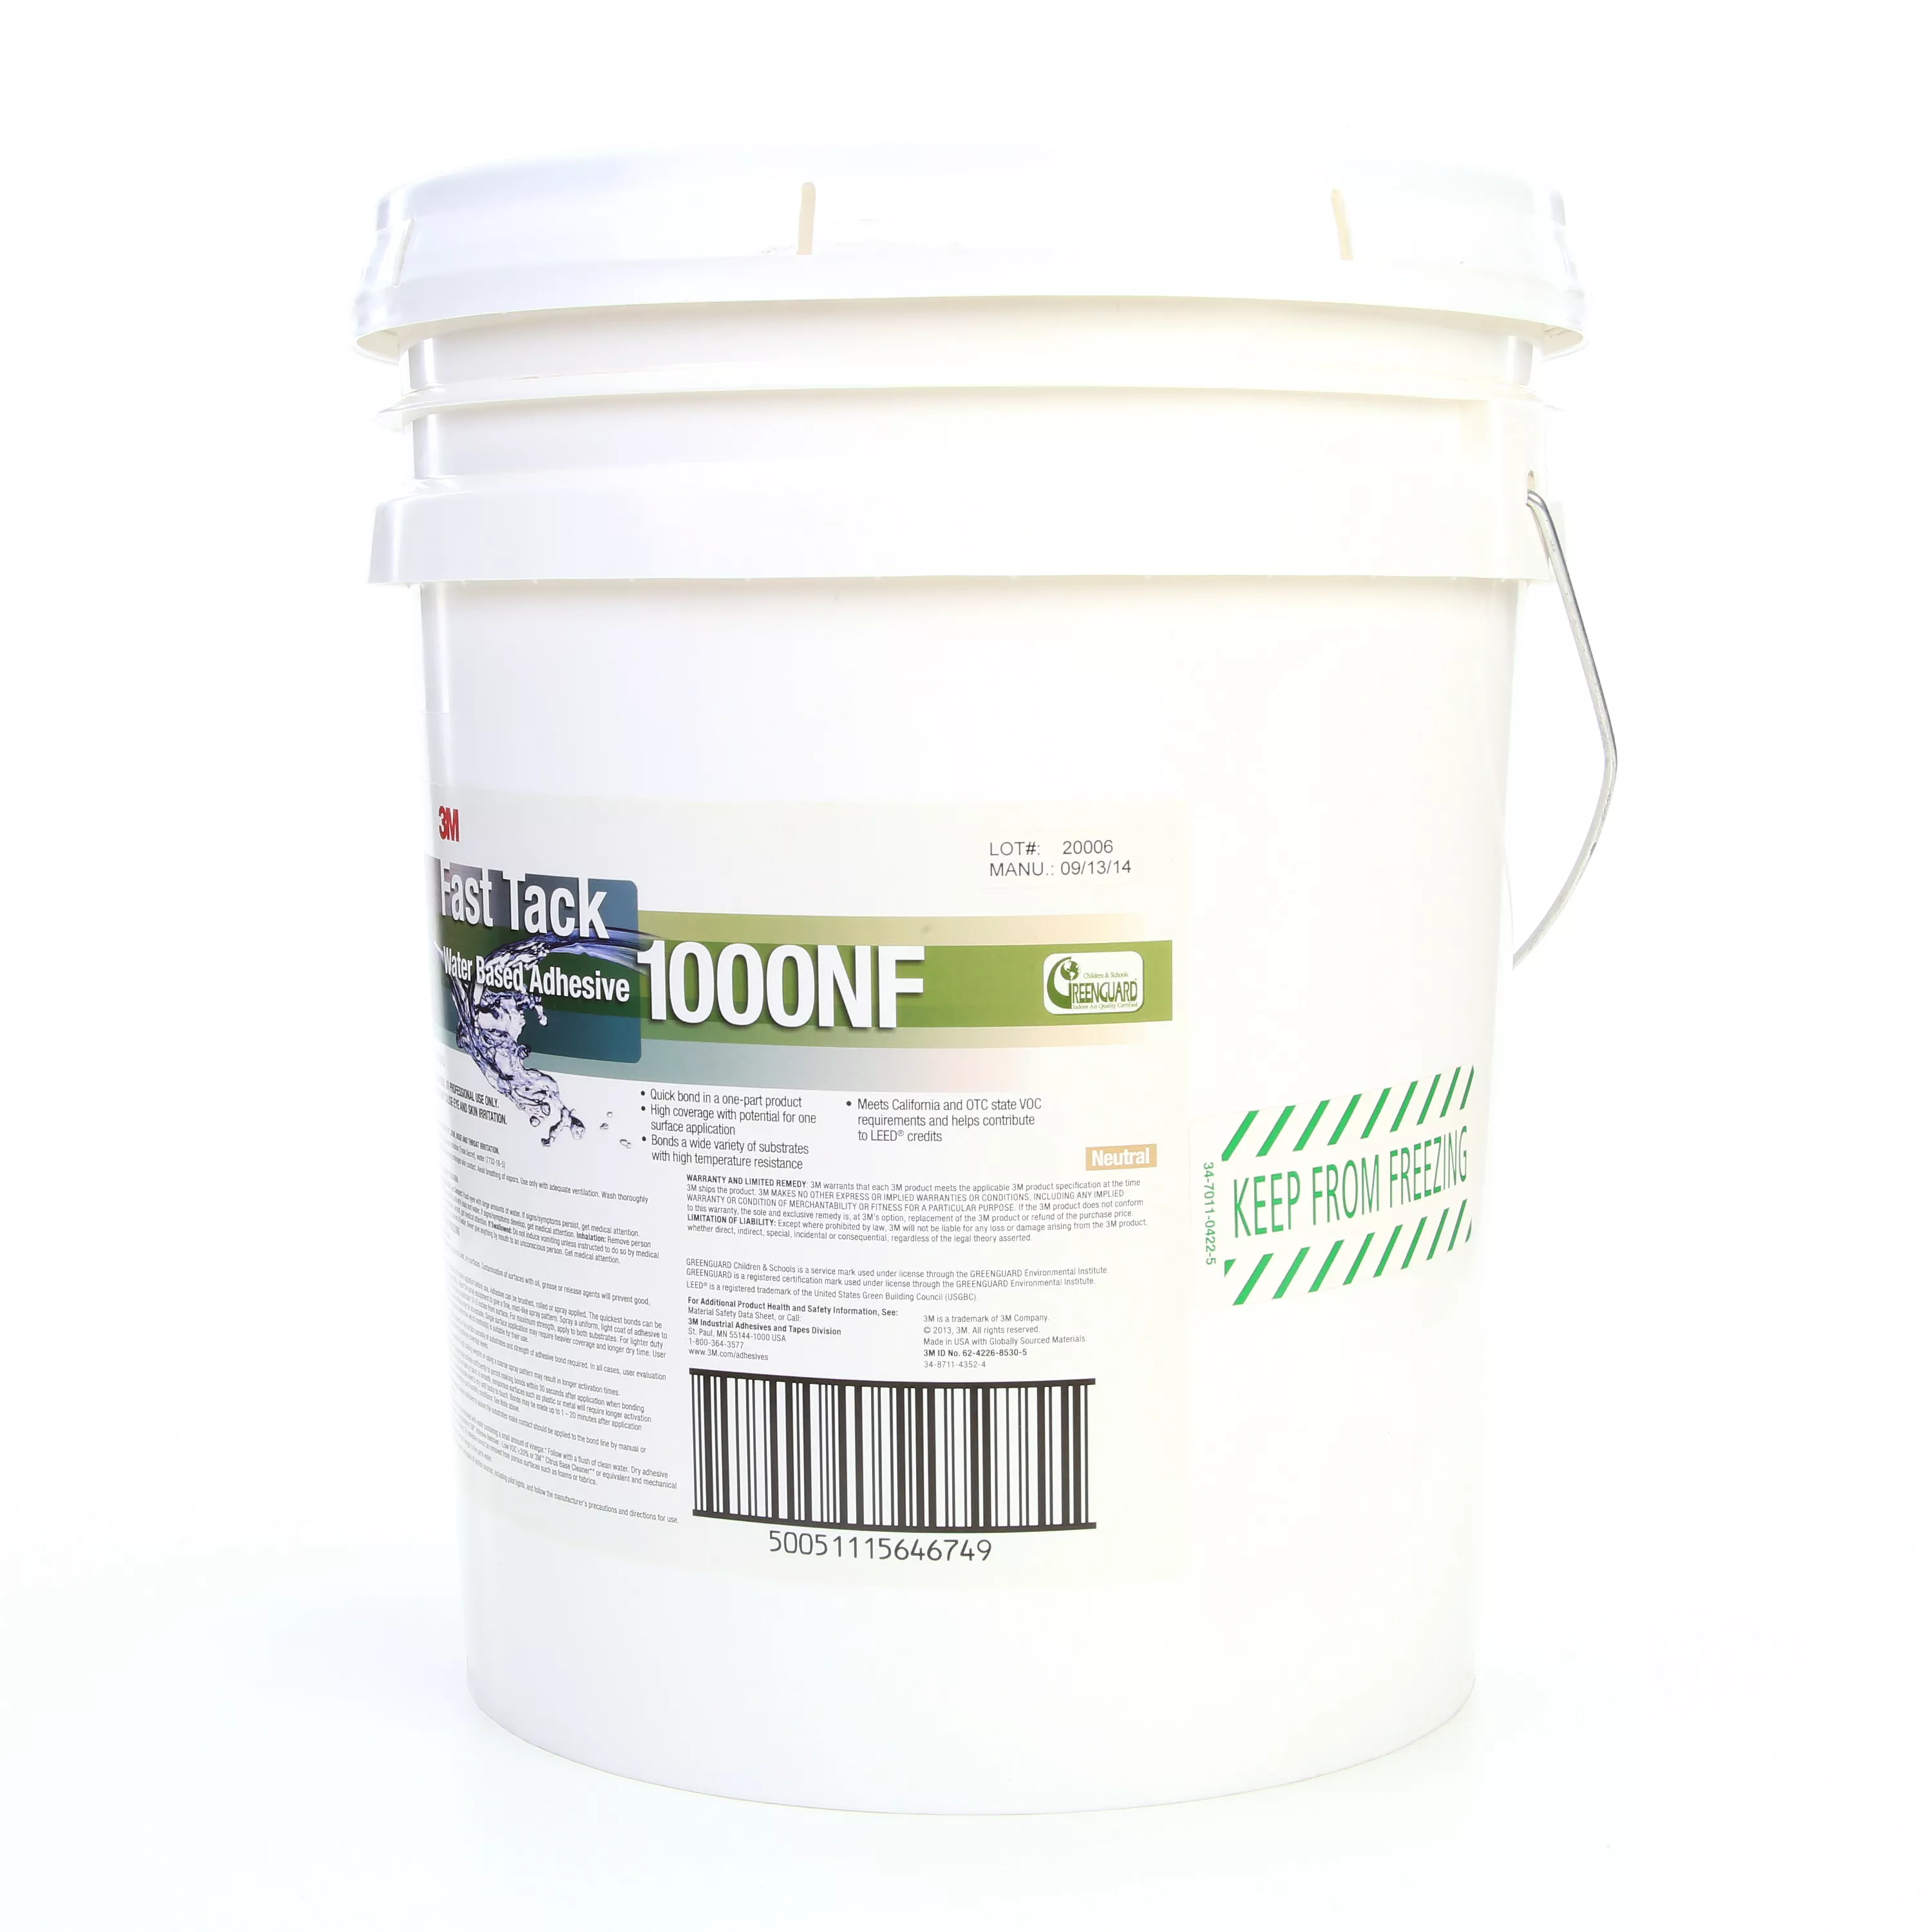 Product Number 1000NF | 3M™ Fast Tack Water Based Adhesive 1000NF